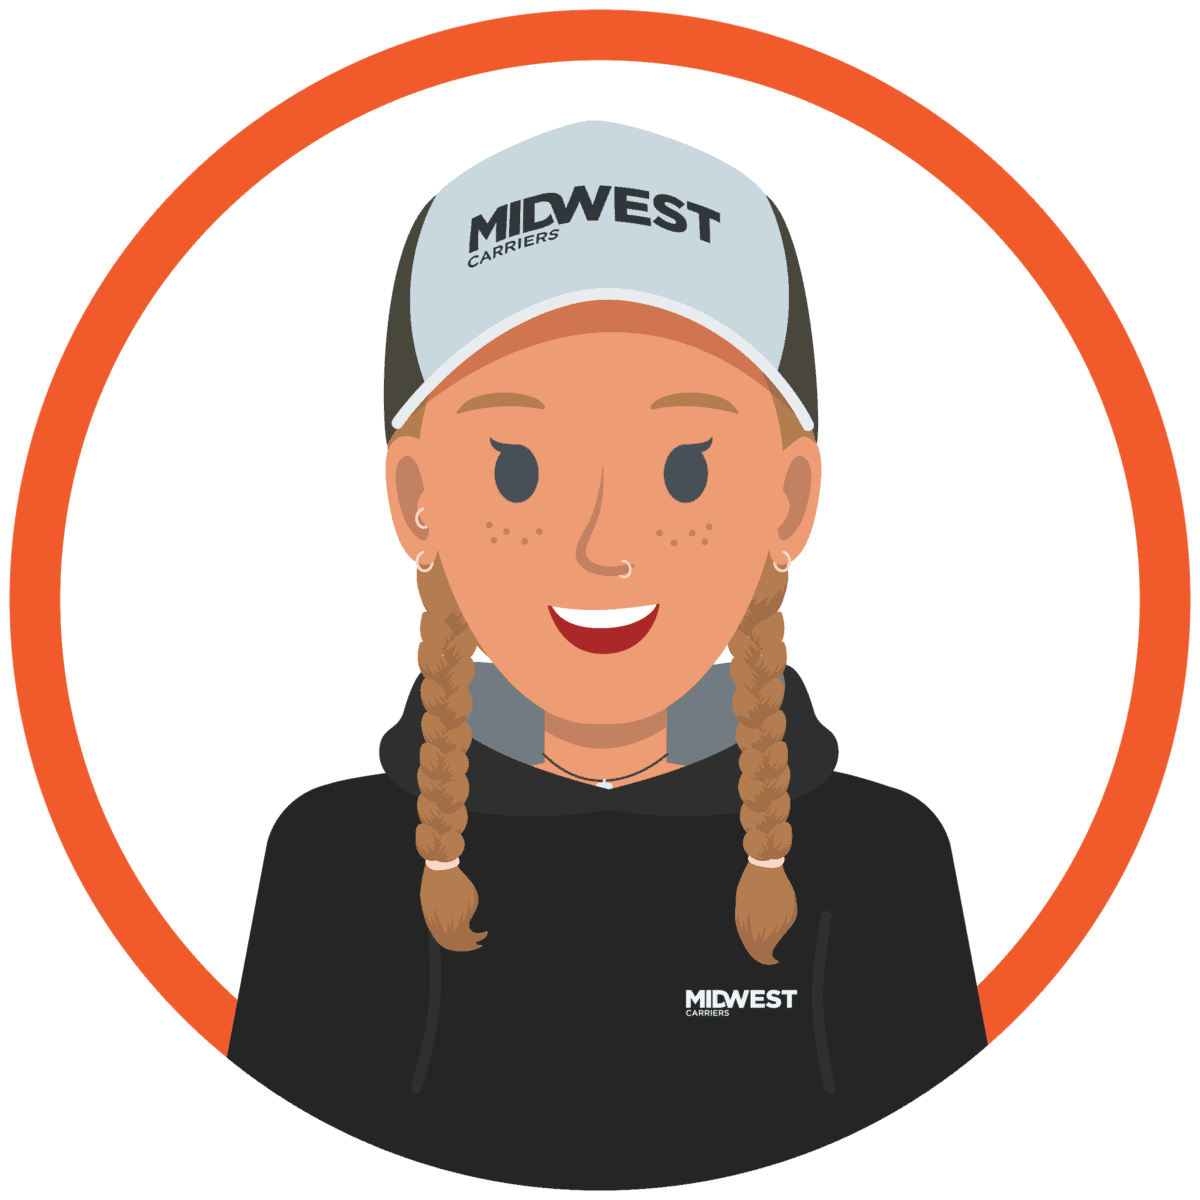 An illustration of a woman wearing a Midwest Carriers baseball cap and sweatshirt. She has two braids on either side of her face and is smiling. She is framed within an outline of a red circle.